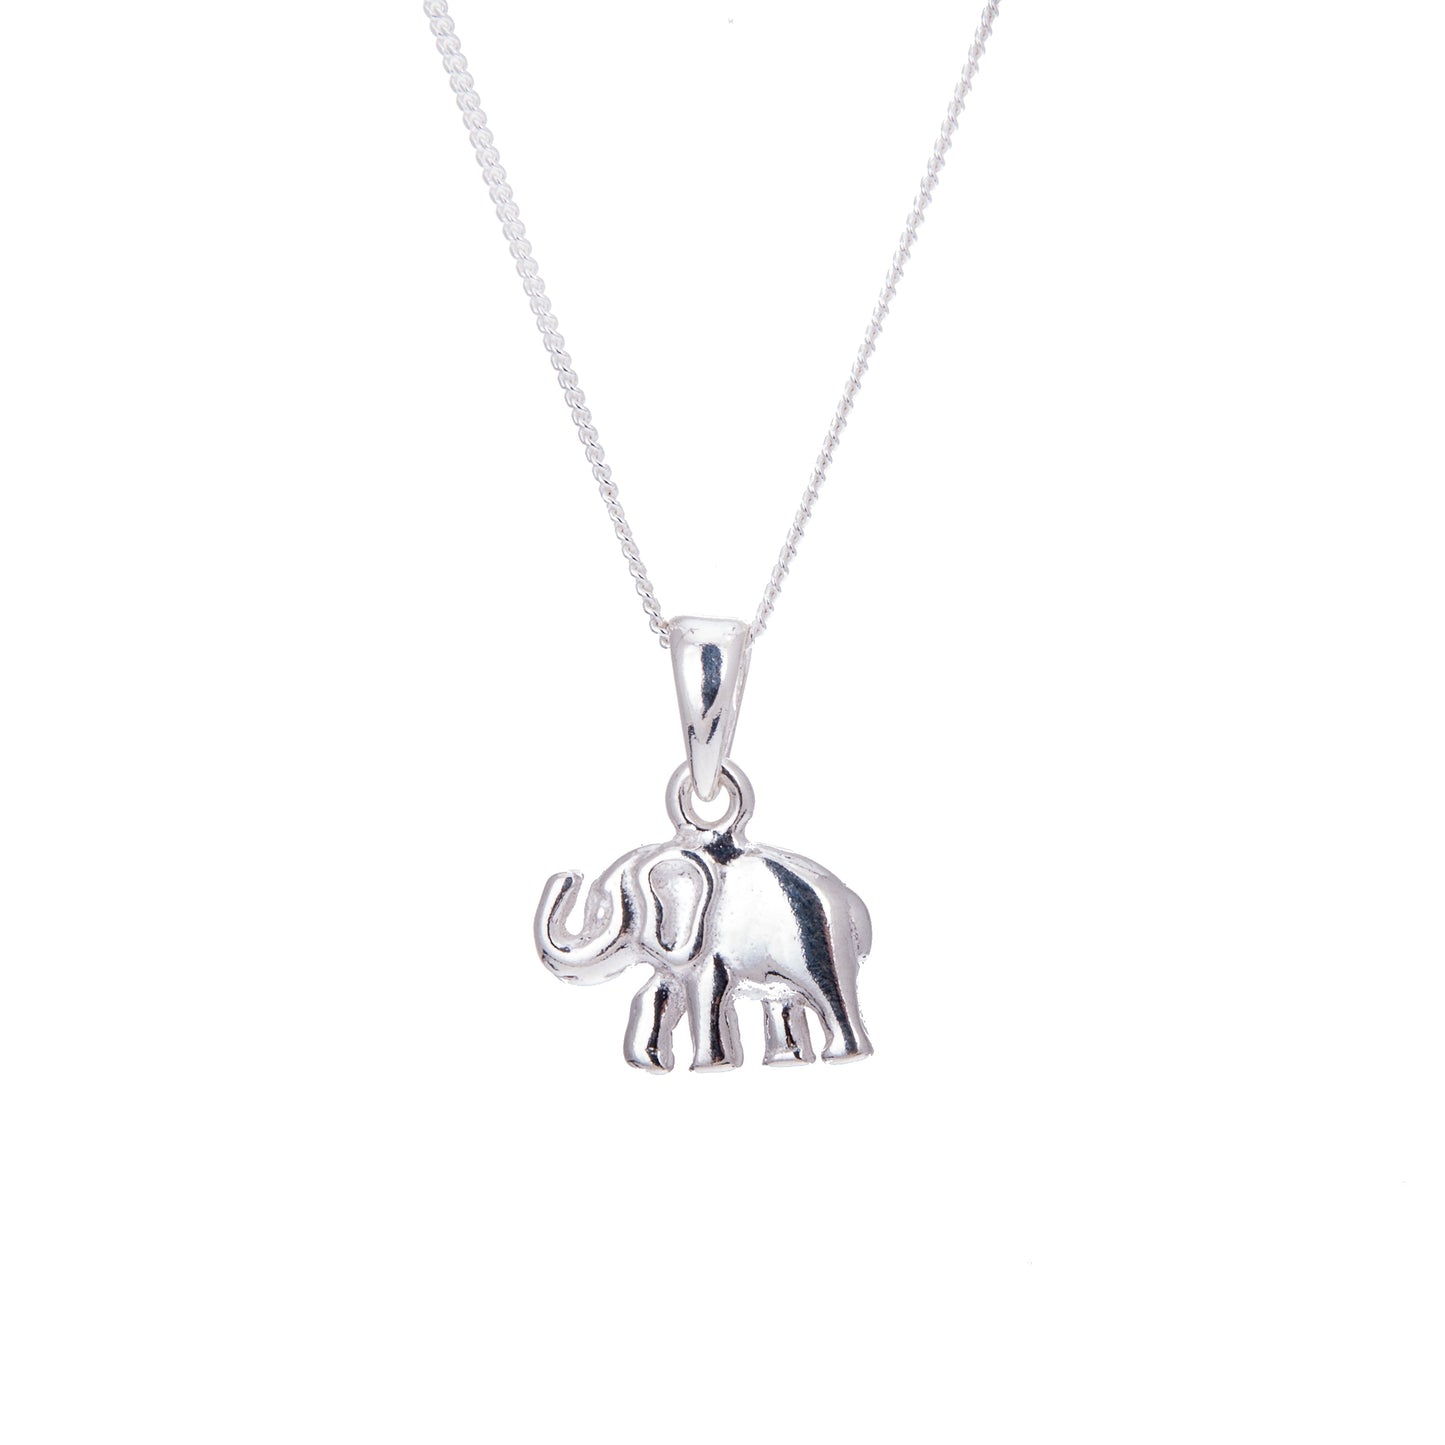 Sterling Silver Elephant Necklace - 14 - 32 Inches